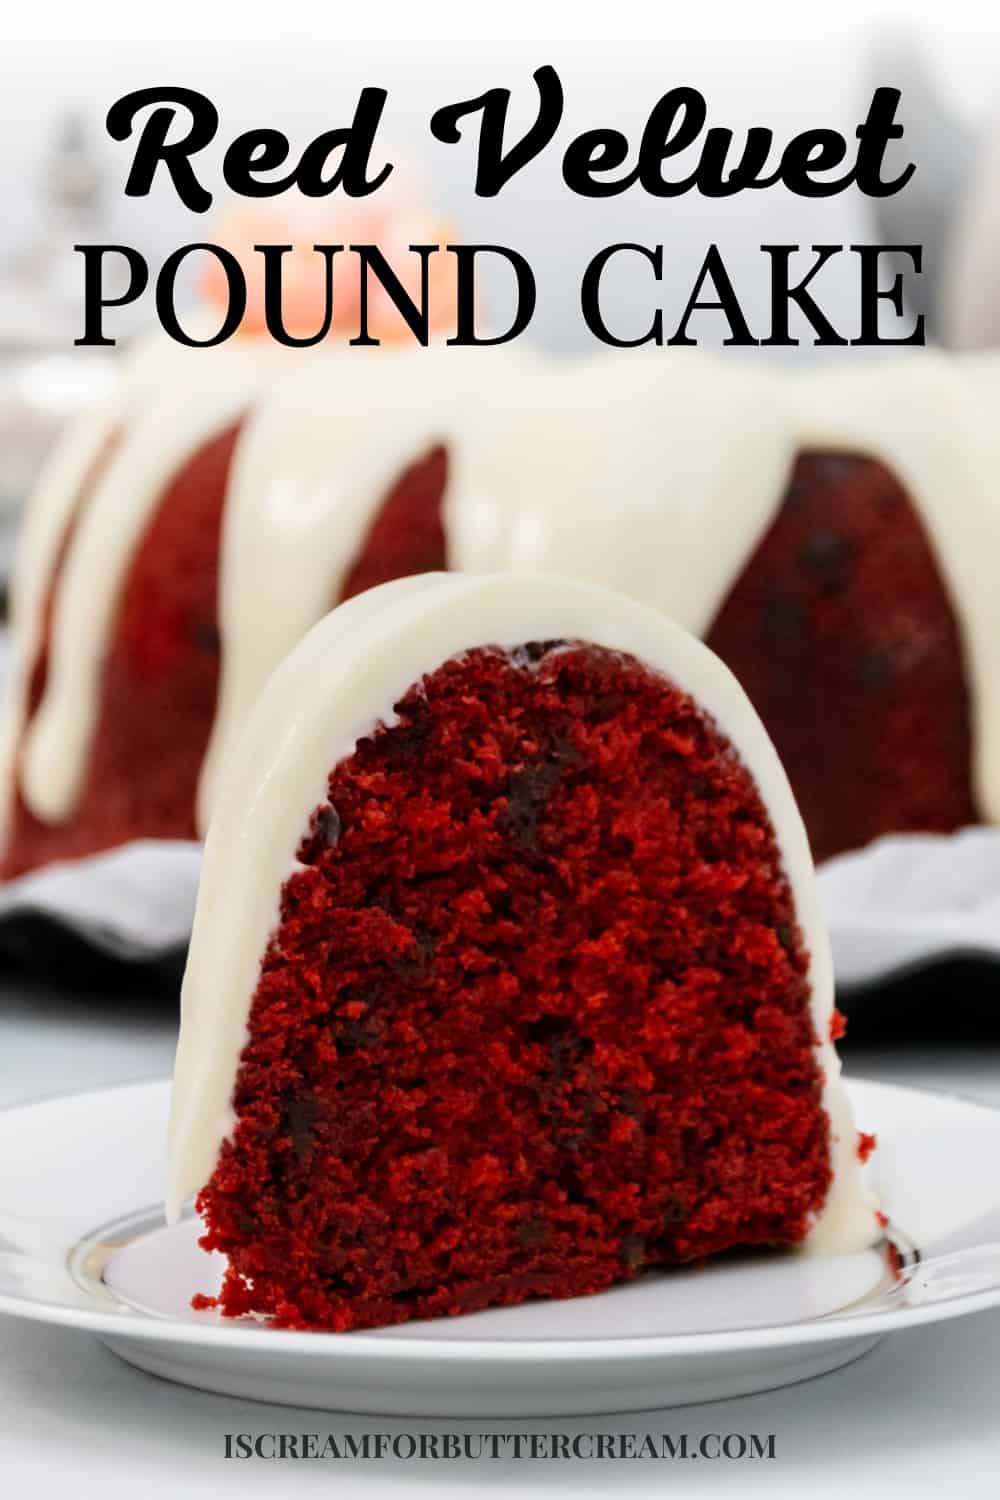 Pinterest image of slice of red pound cake with chocolate chips on a white plate with text overlay.